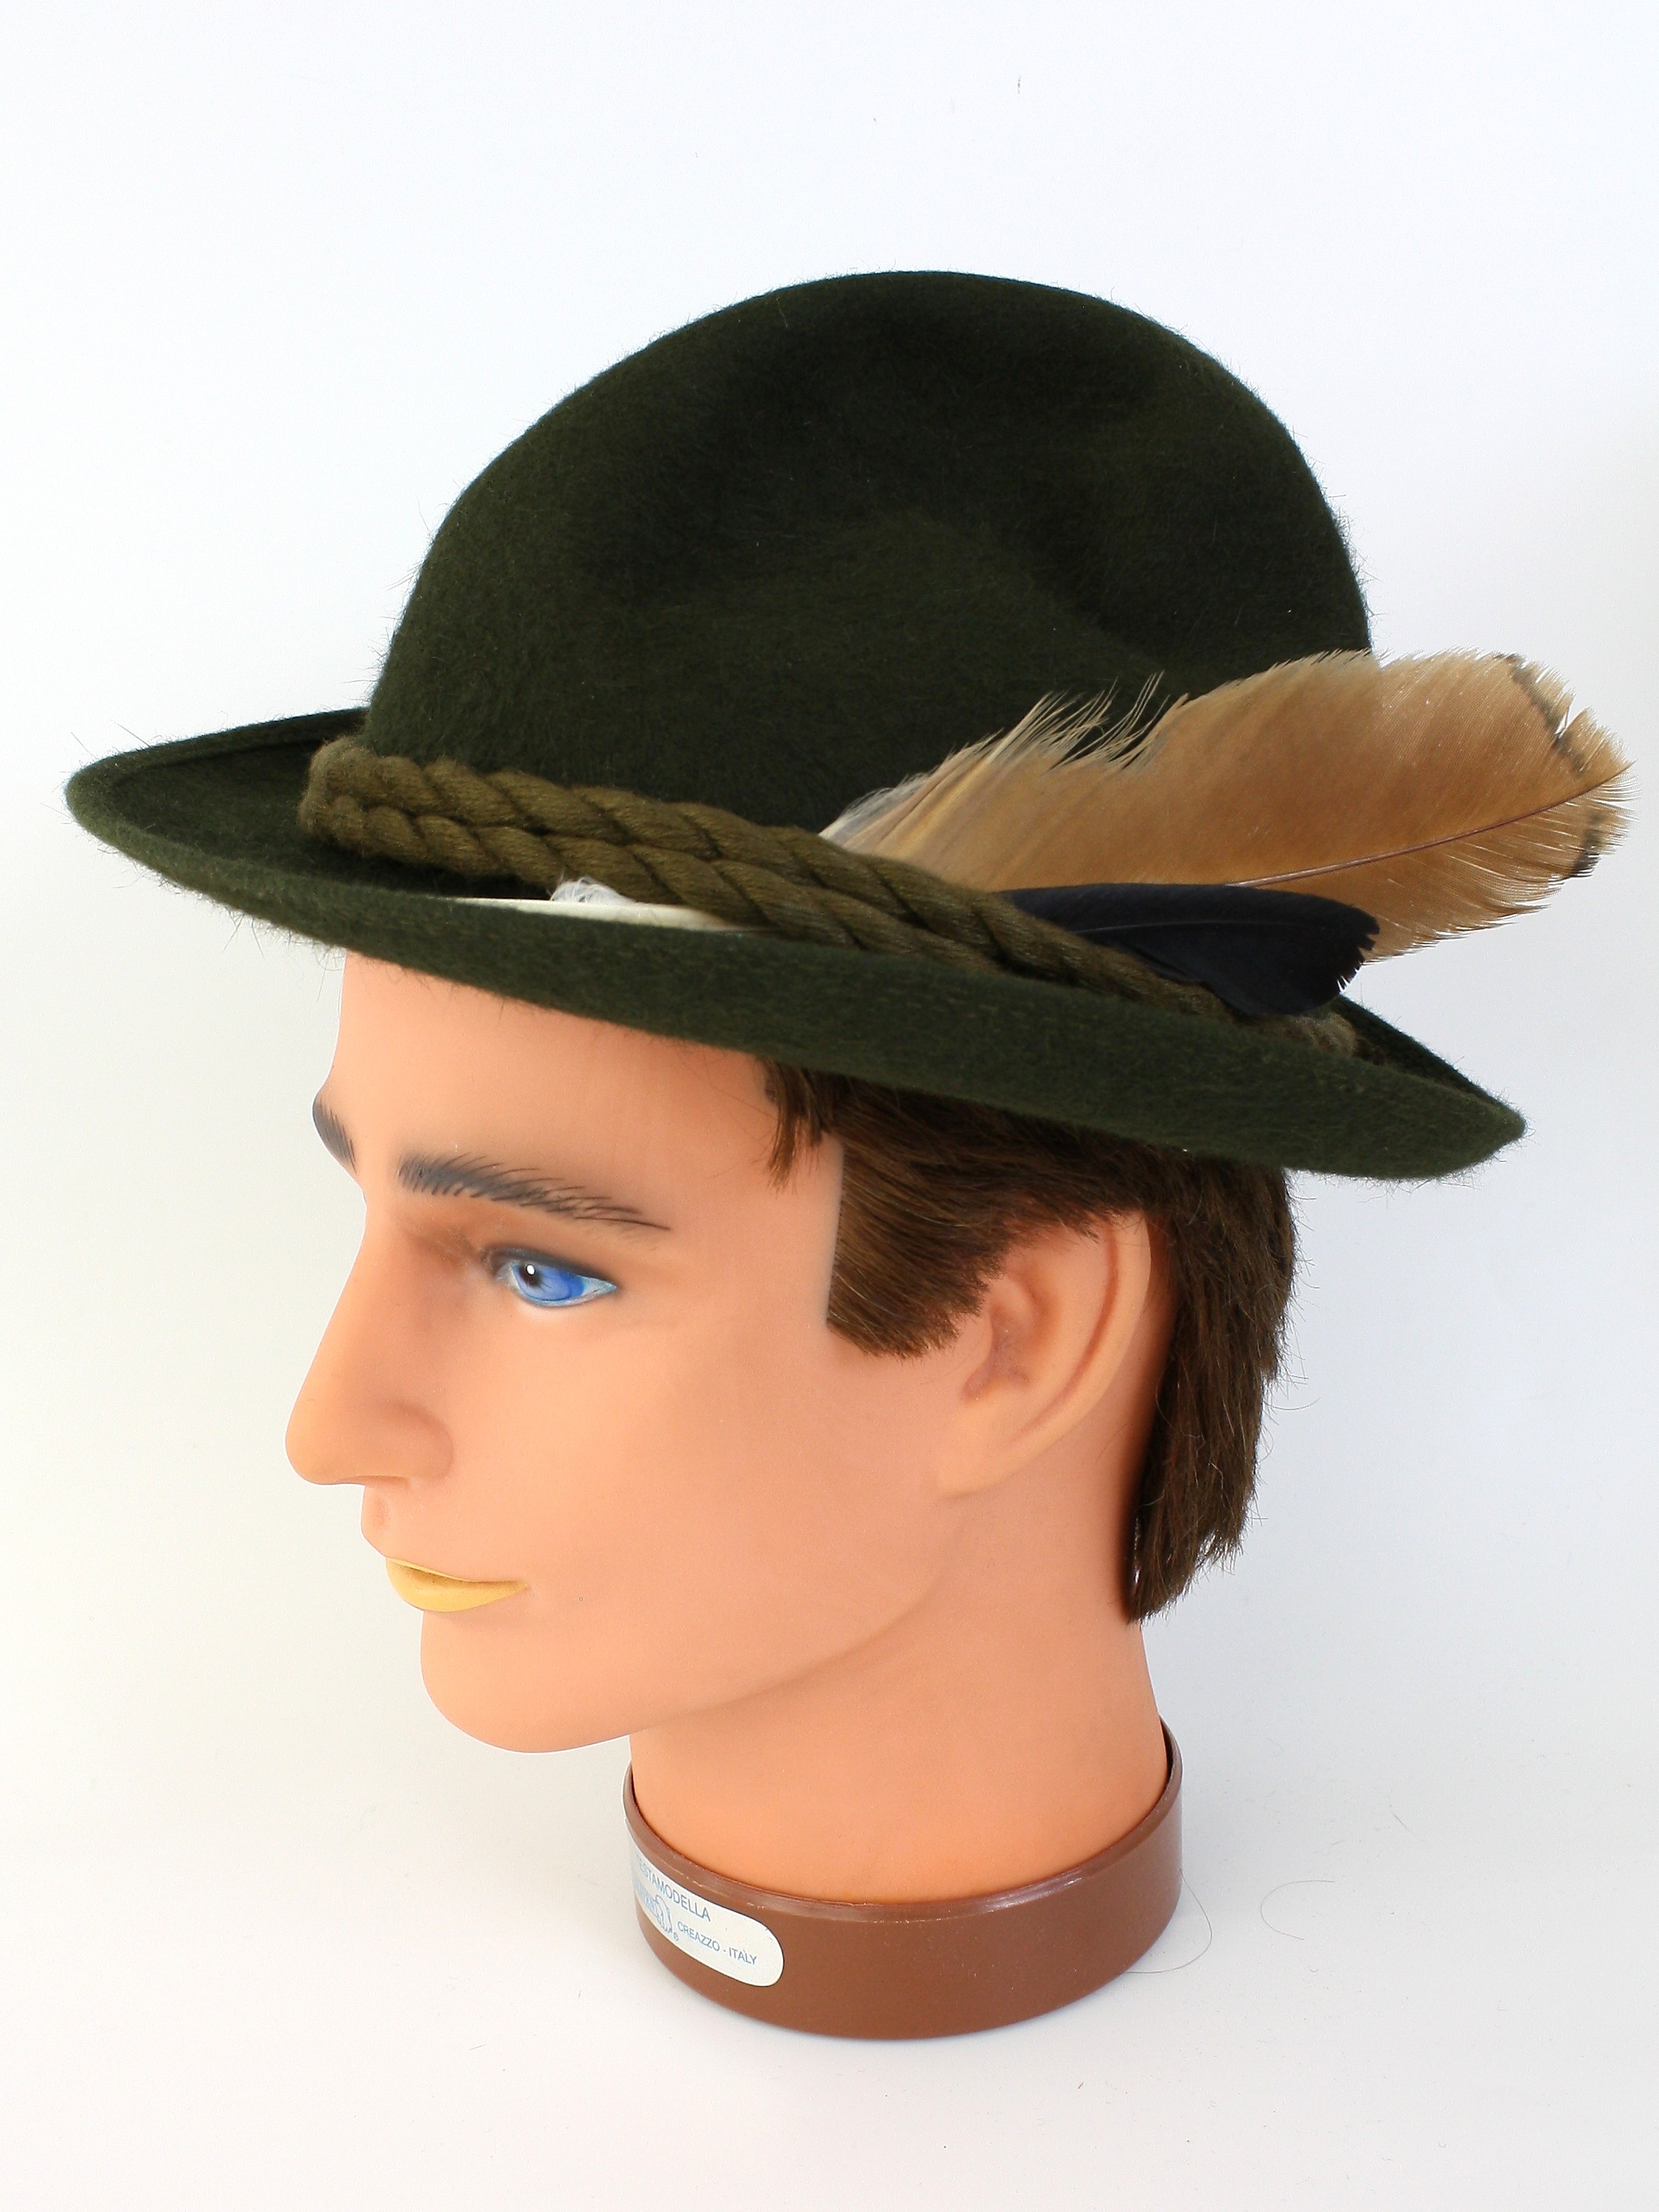 Retro 1960's Hat (Mayser, A. Breiler) : -Mayser, A. Breiler- Mens loden green background fur felt with jute tan twisted cord hatband, brown leather inside sweatband, alpine style hat or fedora